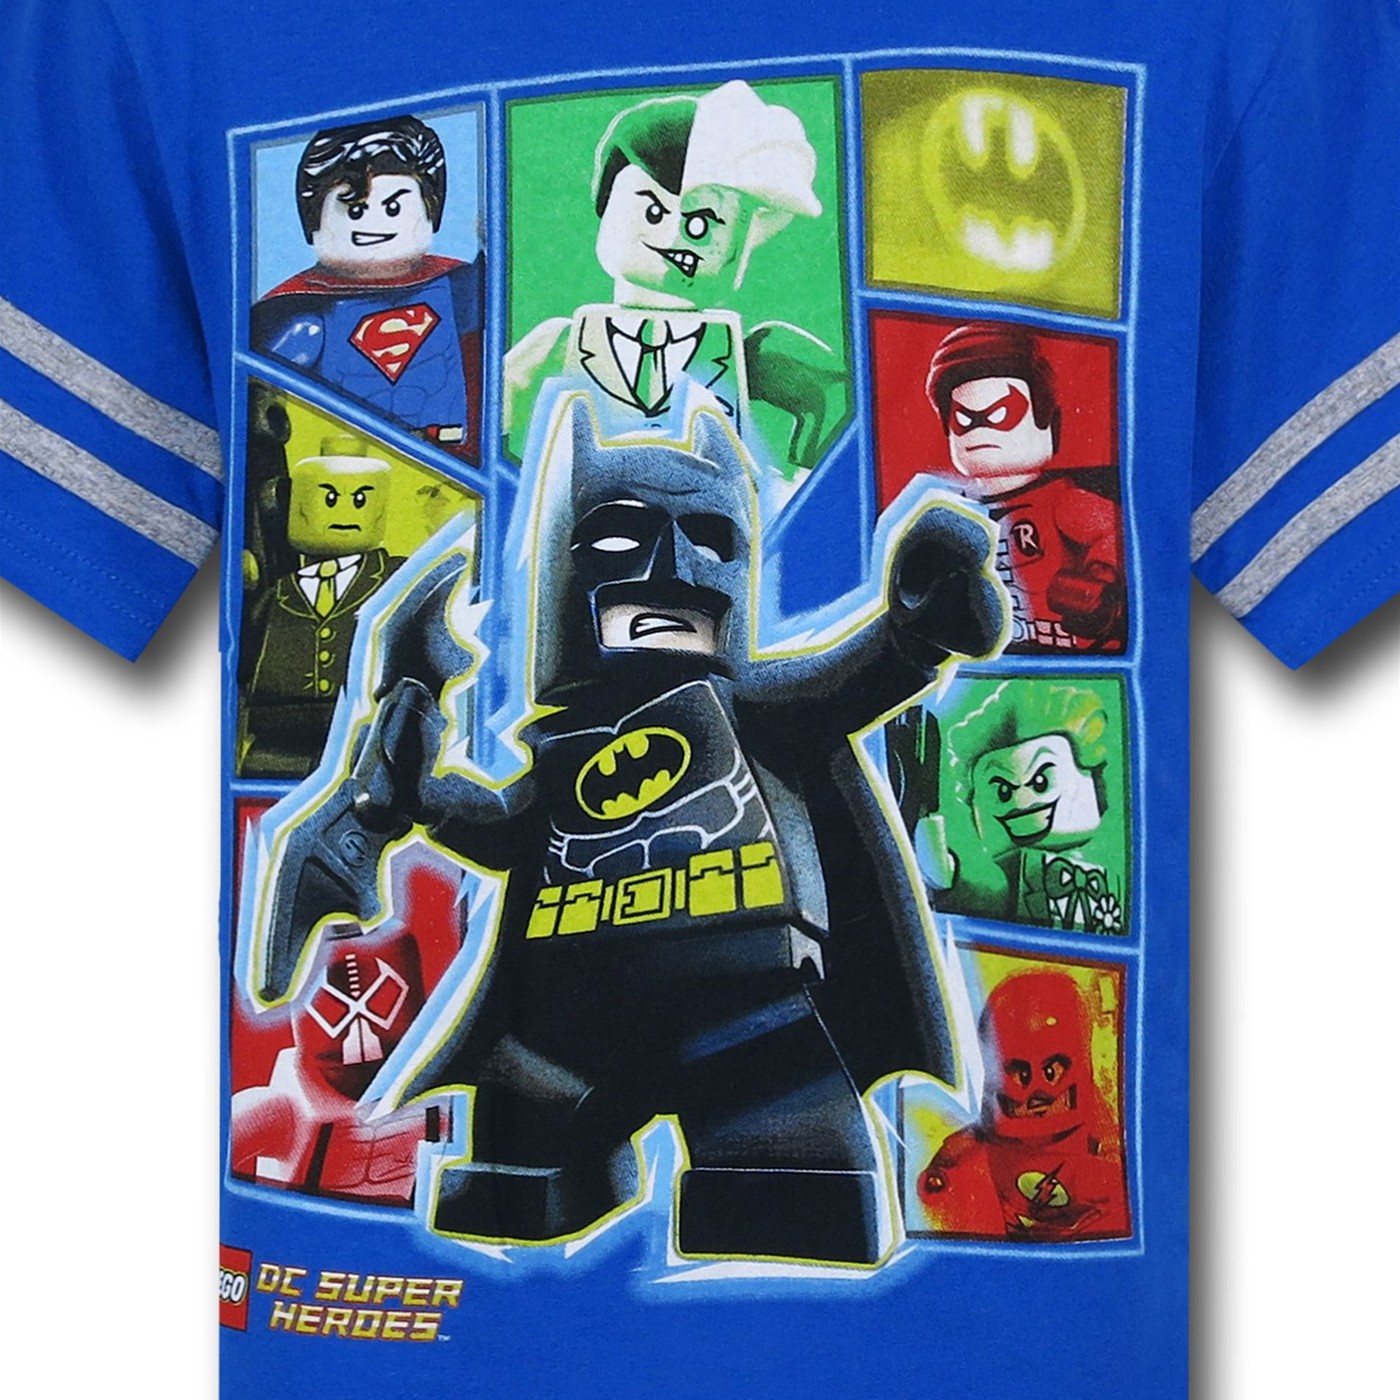 DC Batman Fronted Lego Heroes Kids Athletic T-Shirt